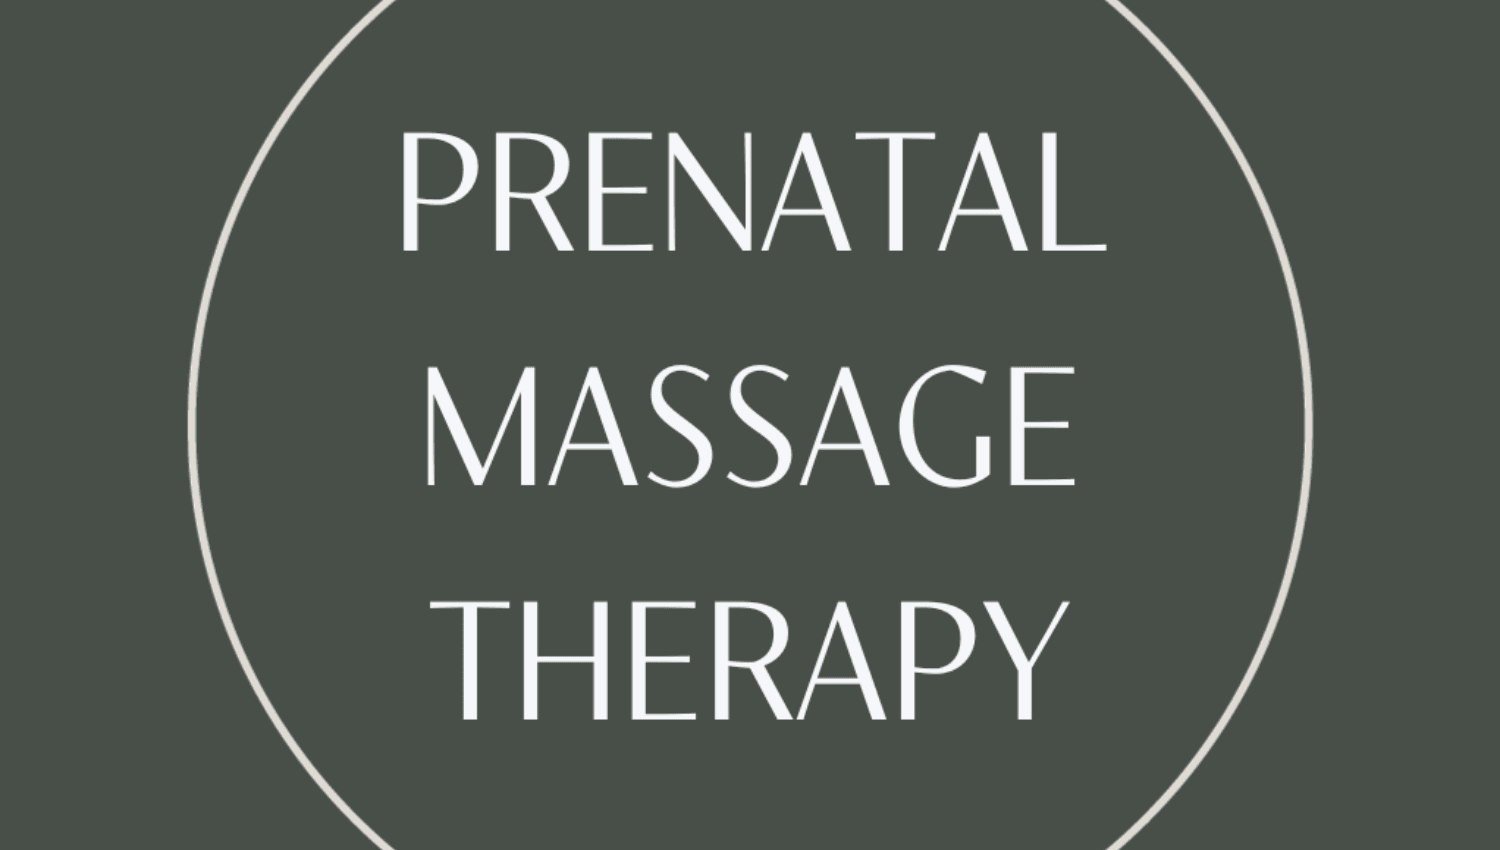 Image for Prenatal Massage Therapy